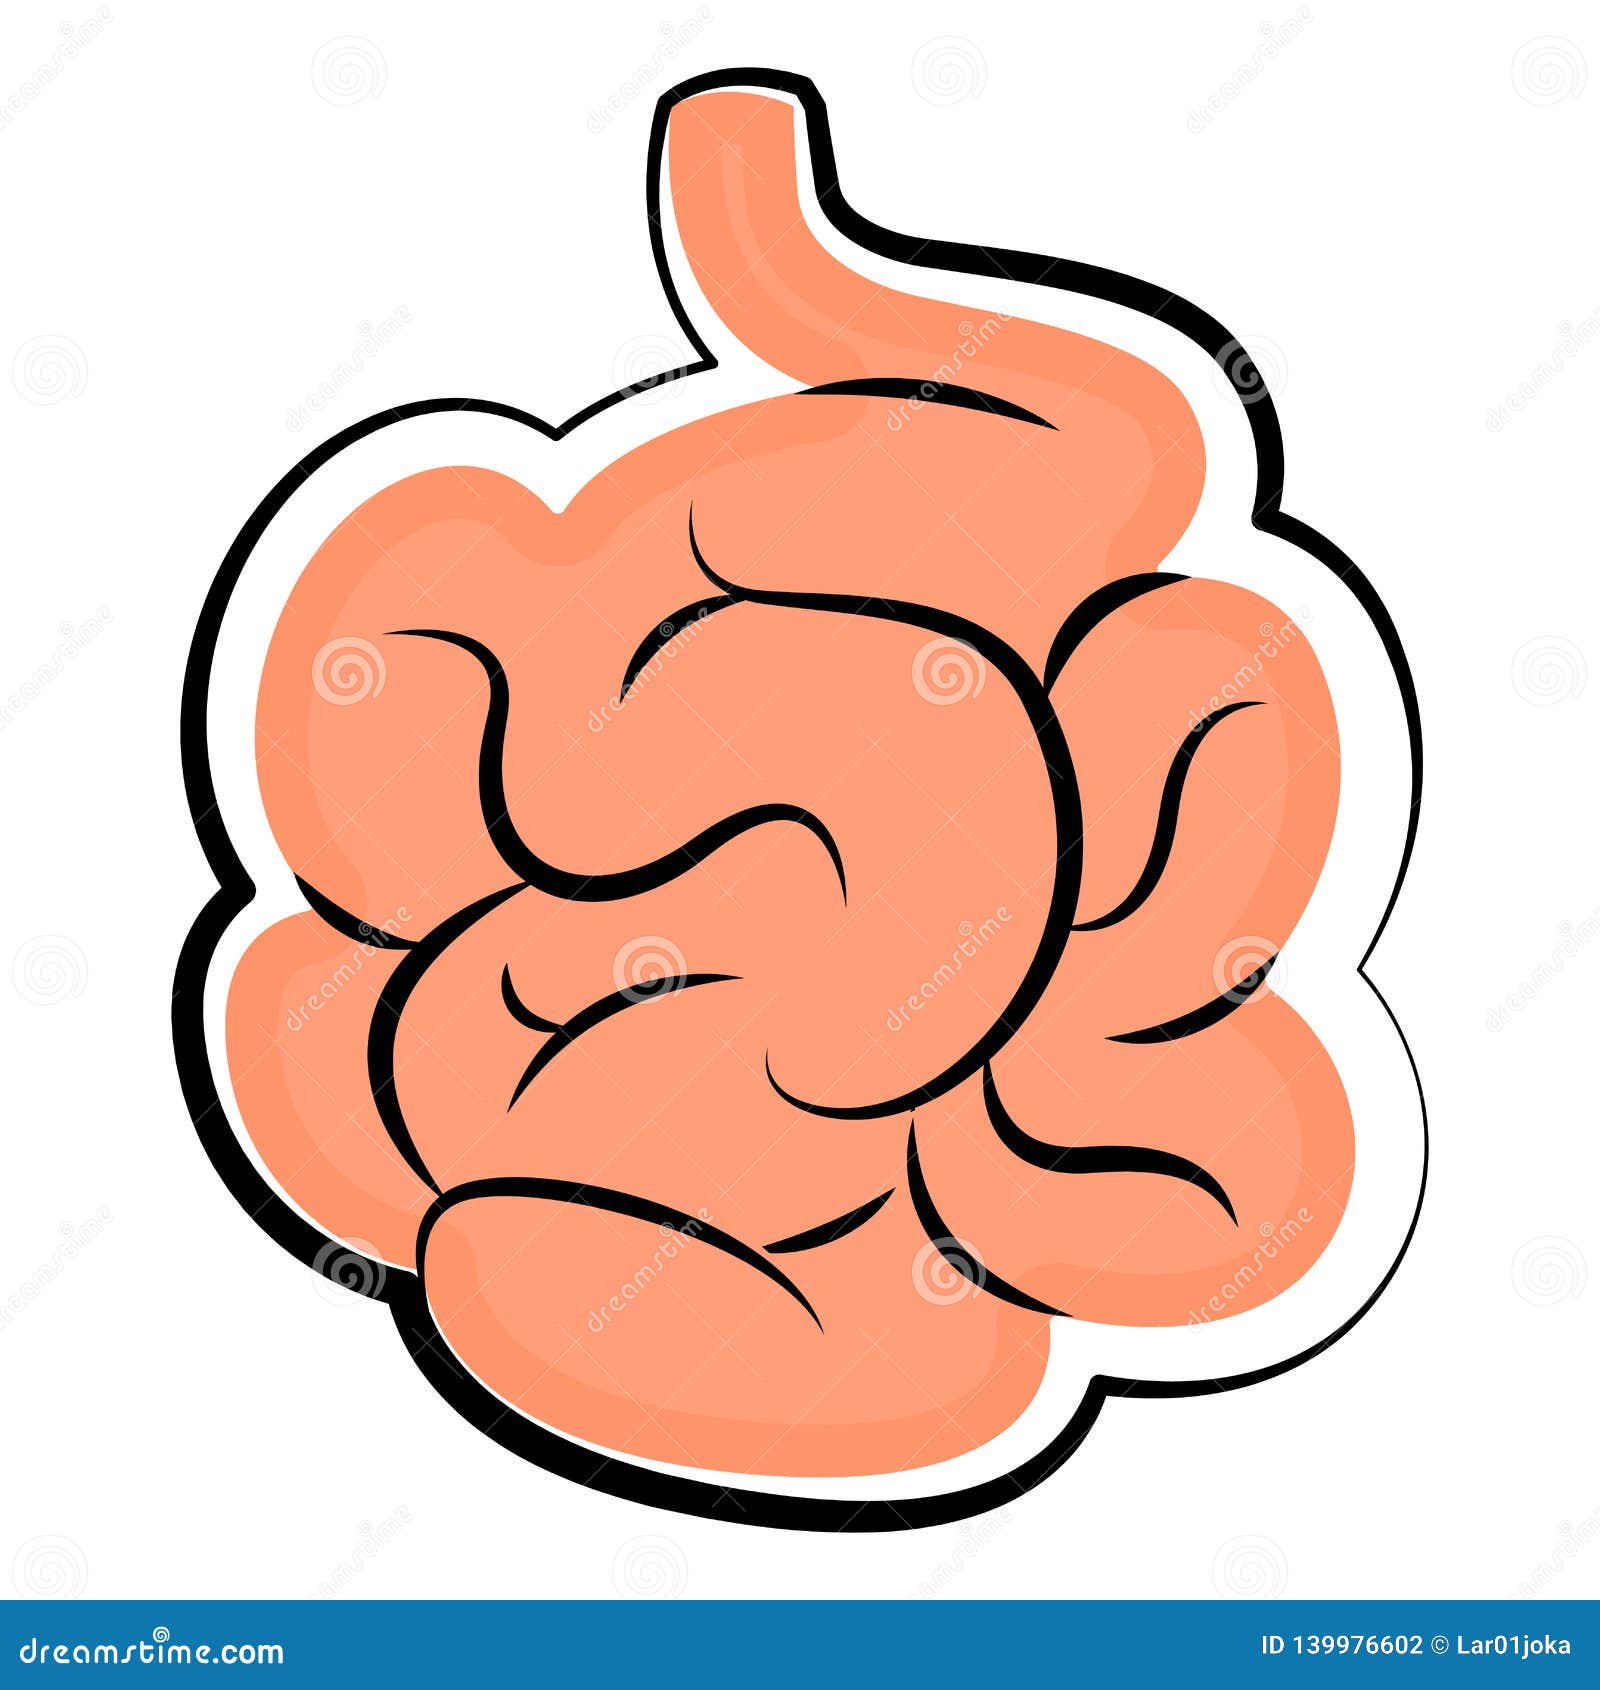 GI tract with labels pointing to the small intestine large intestine  colon sigmoid colon cecum appendix rectum and anus  Media Asset   NIDDK